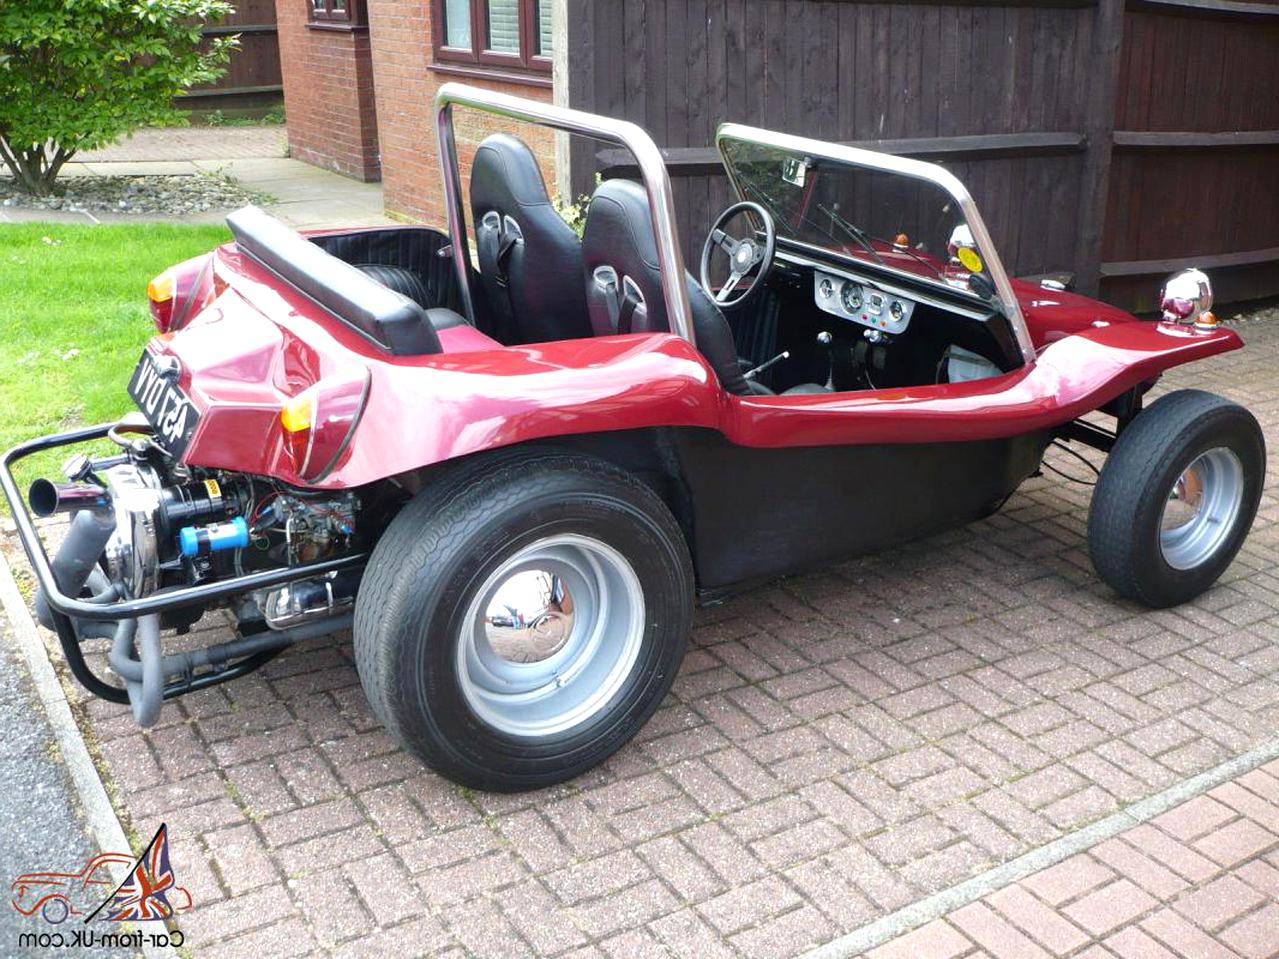 vw buggy for sale uk